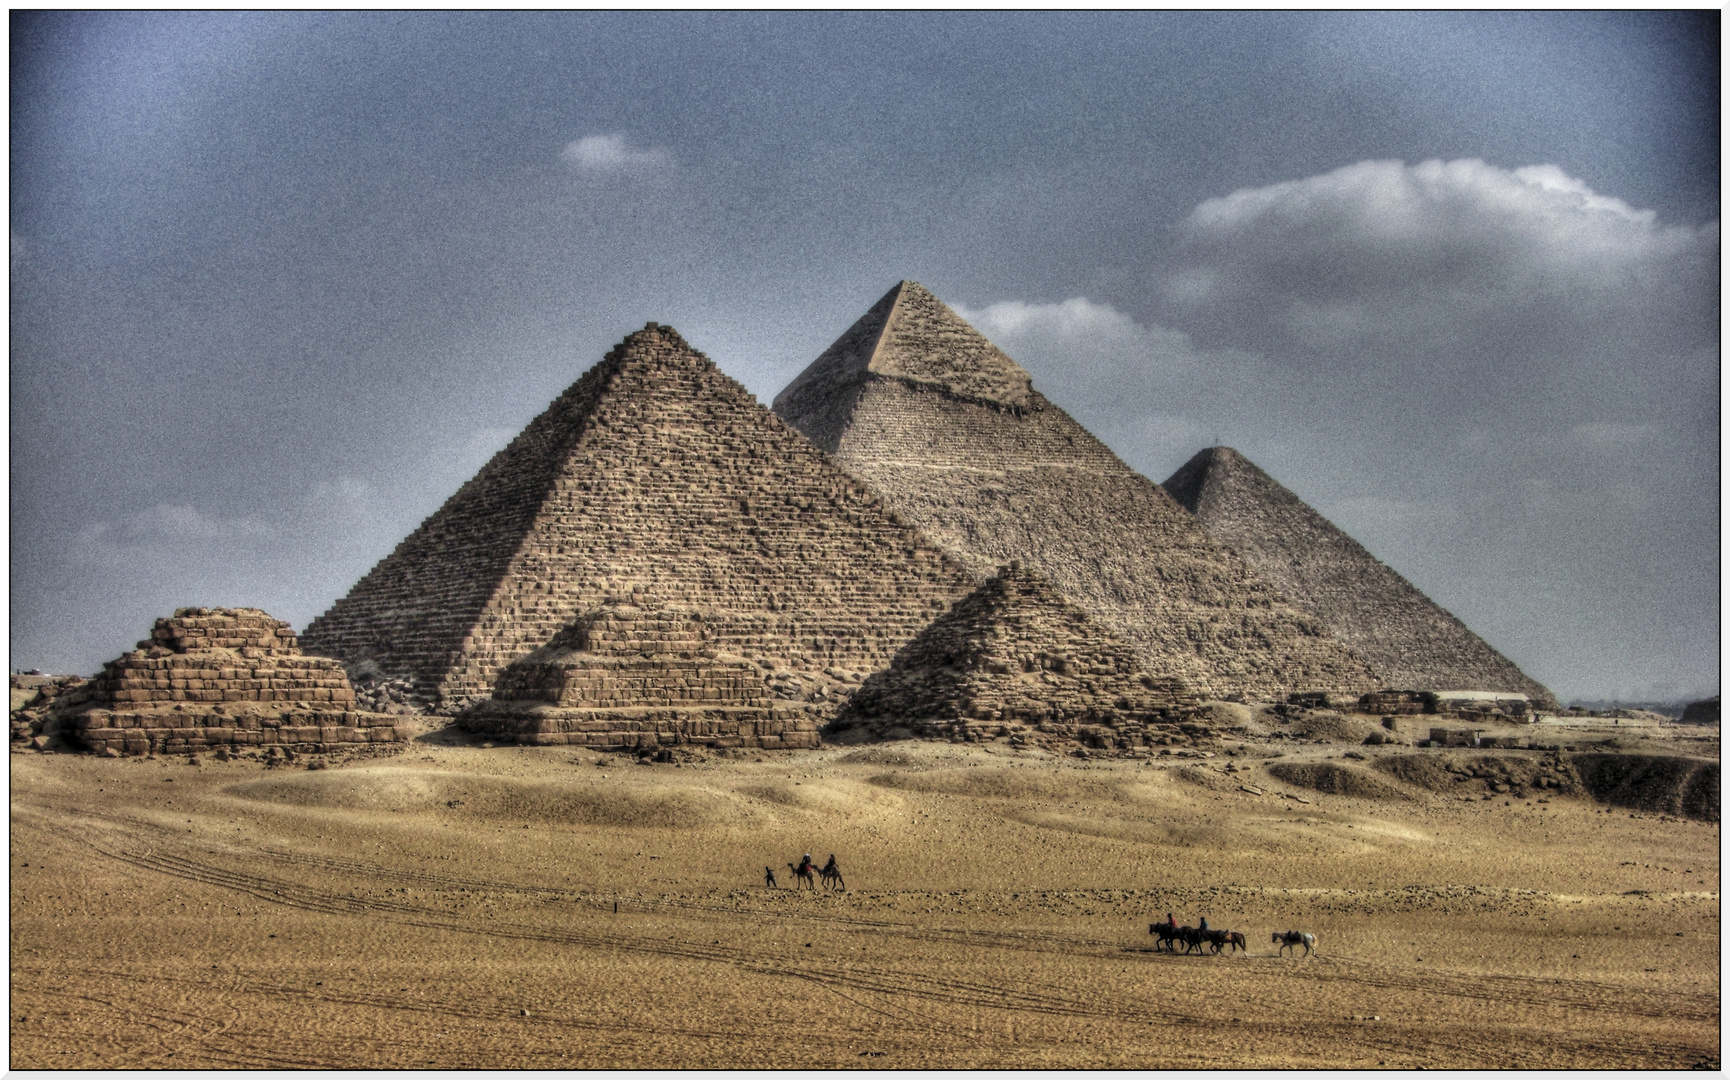 Pyramids with Camels and Horses